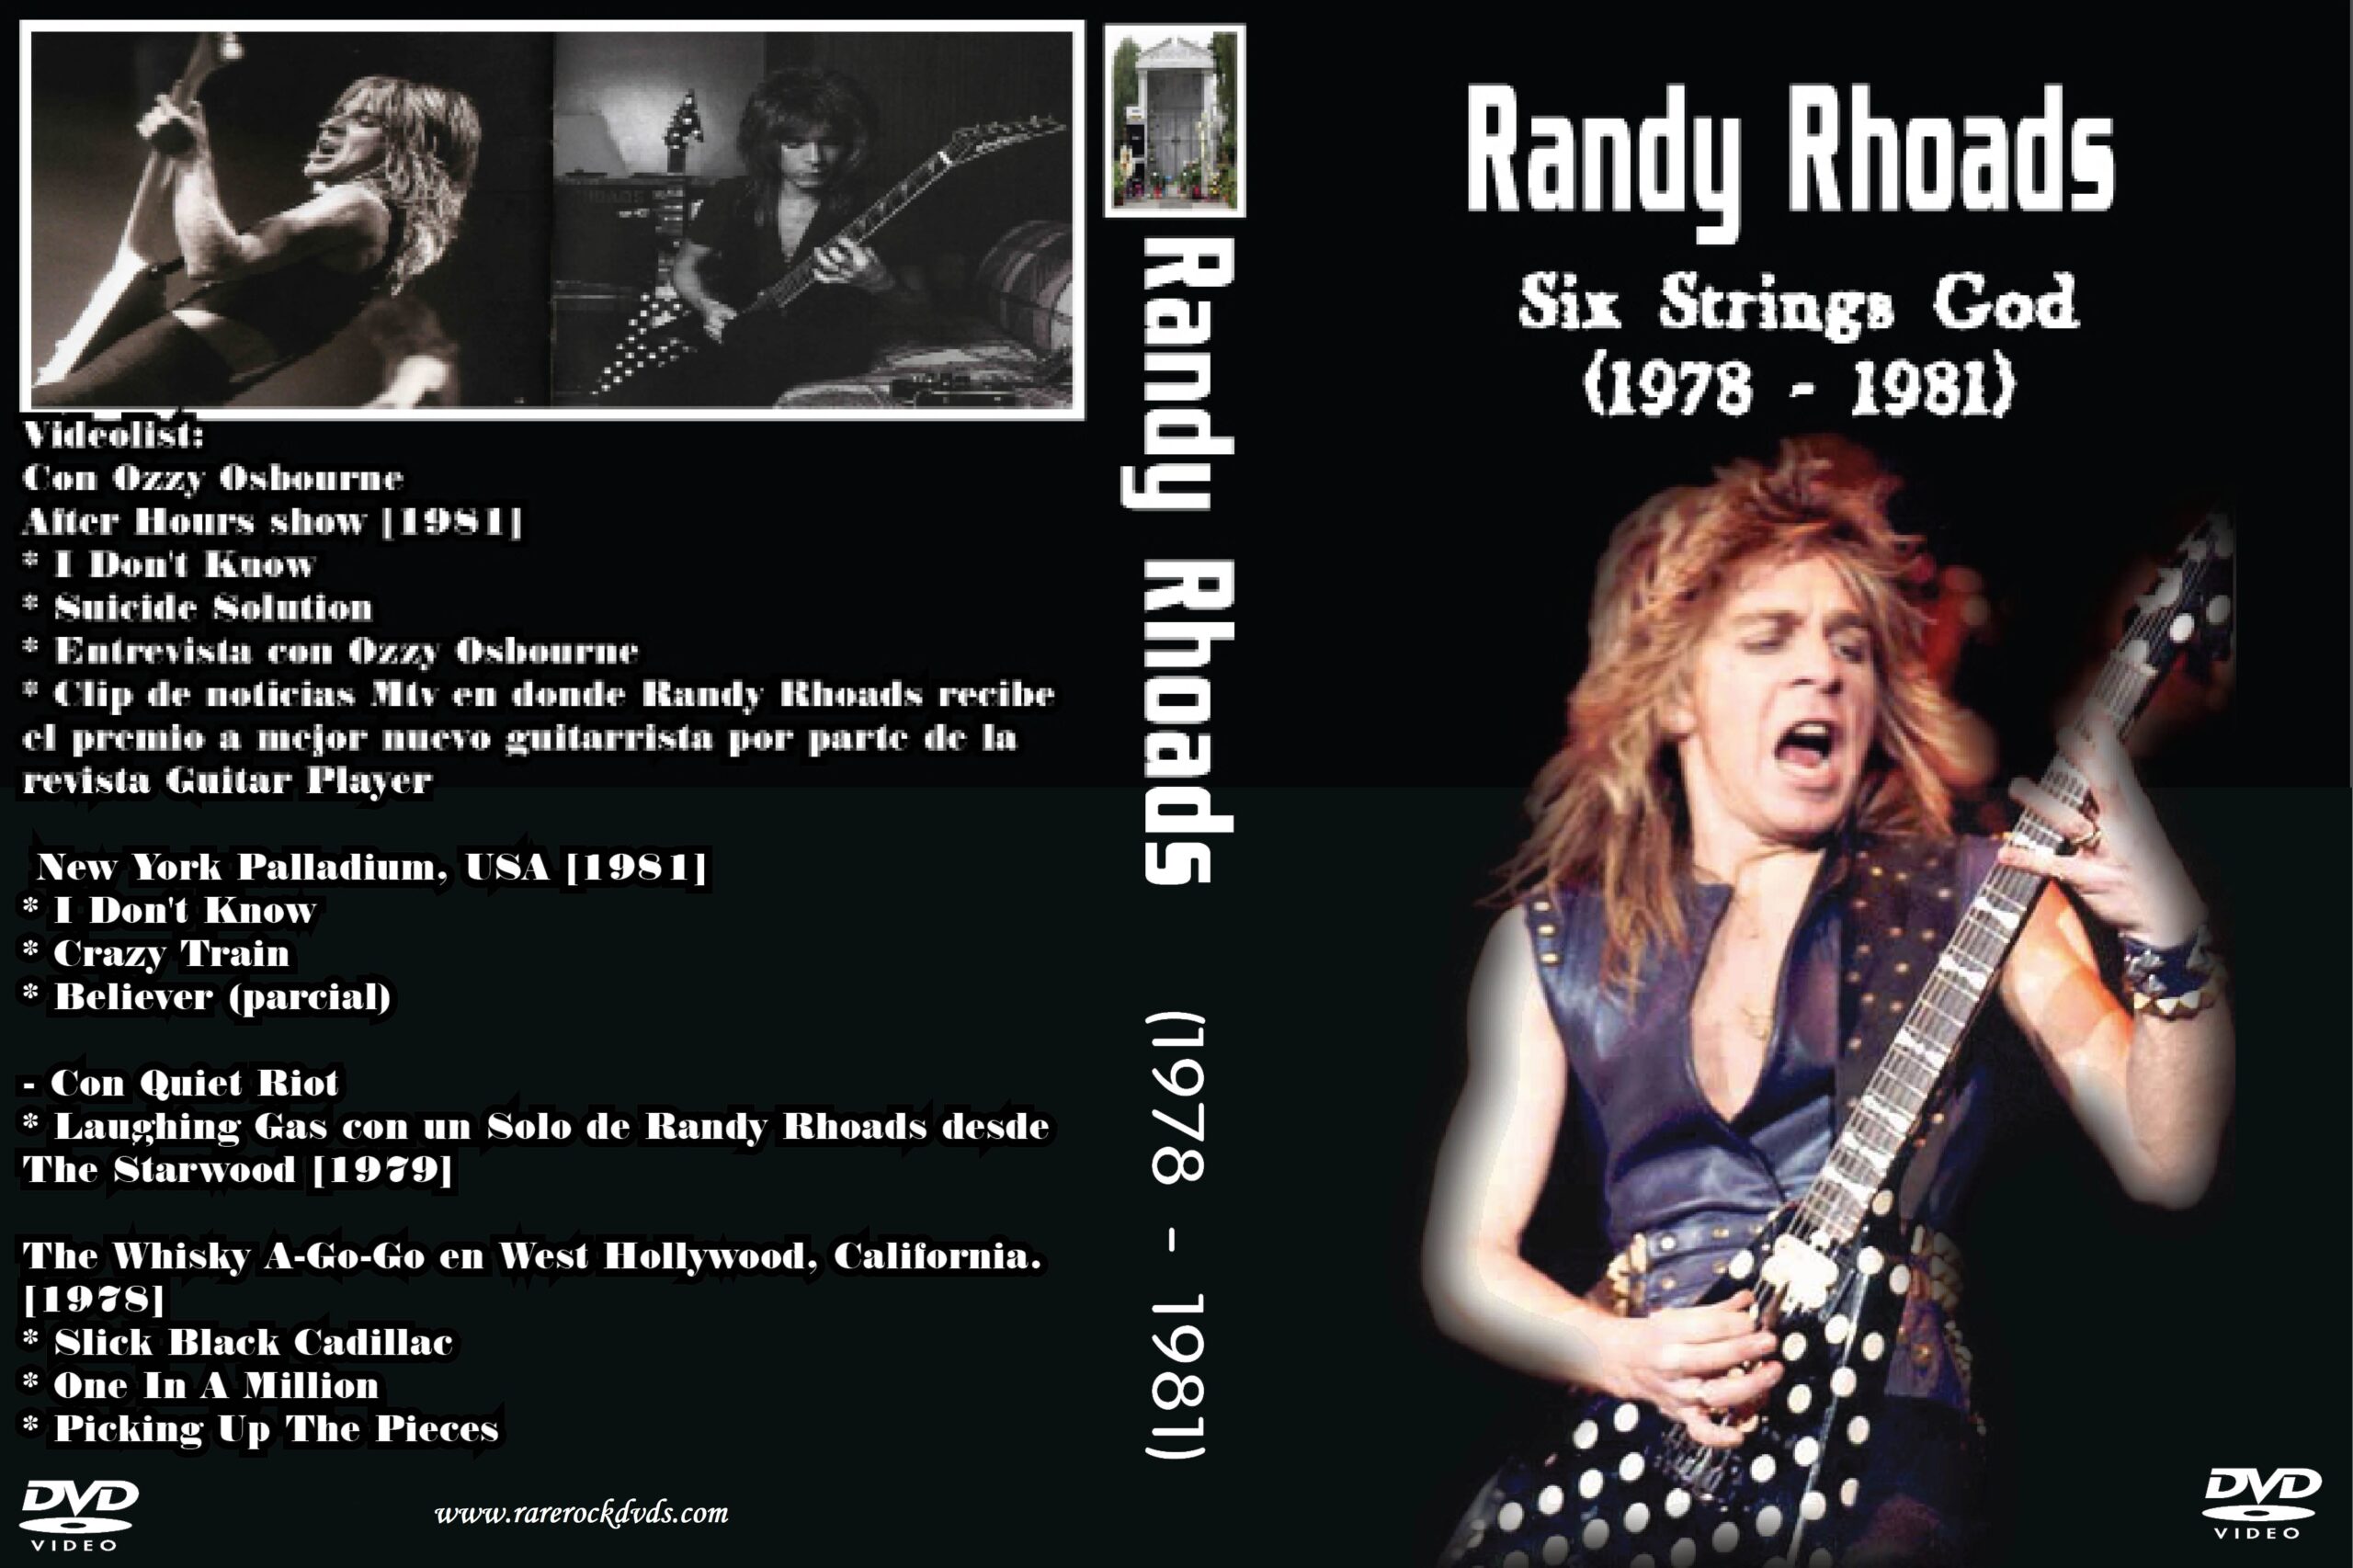 Randy Rhoads - Six String God DVD - The World's Largest Site for